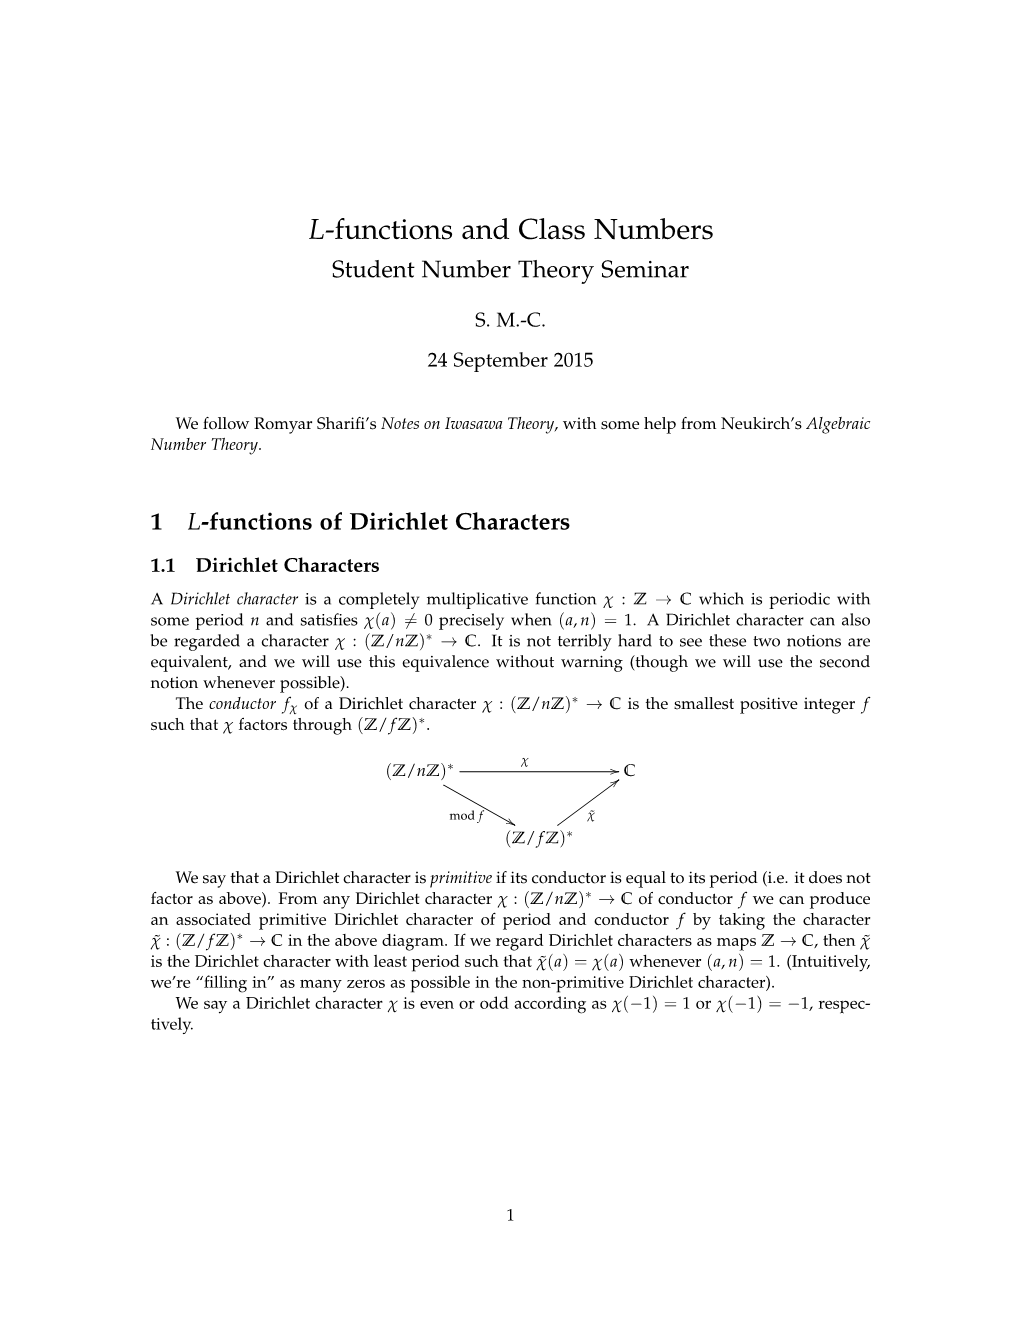 L-Functions and Class Numbers Student Number Theory Seminar